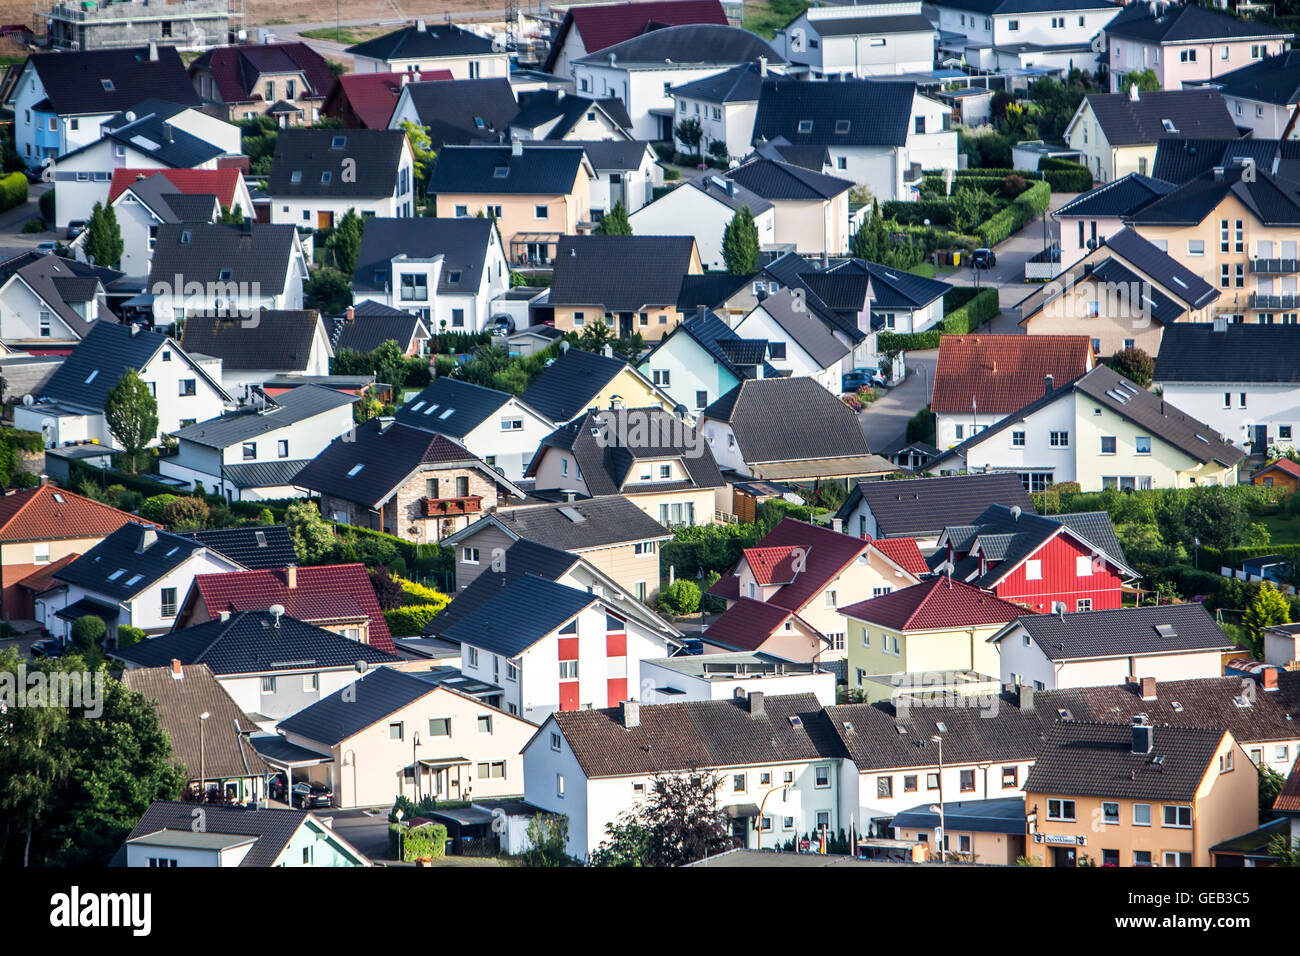 Family houses and apartment buildings, residential development, residential area, Remagen, Germany Stock Photo